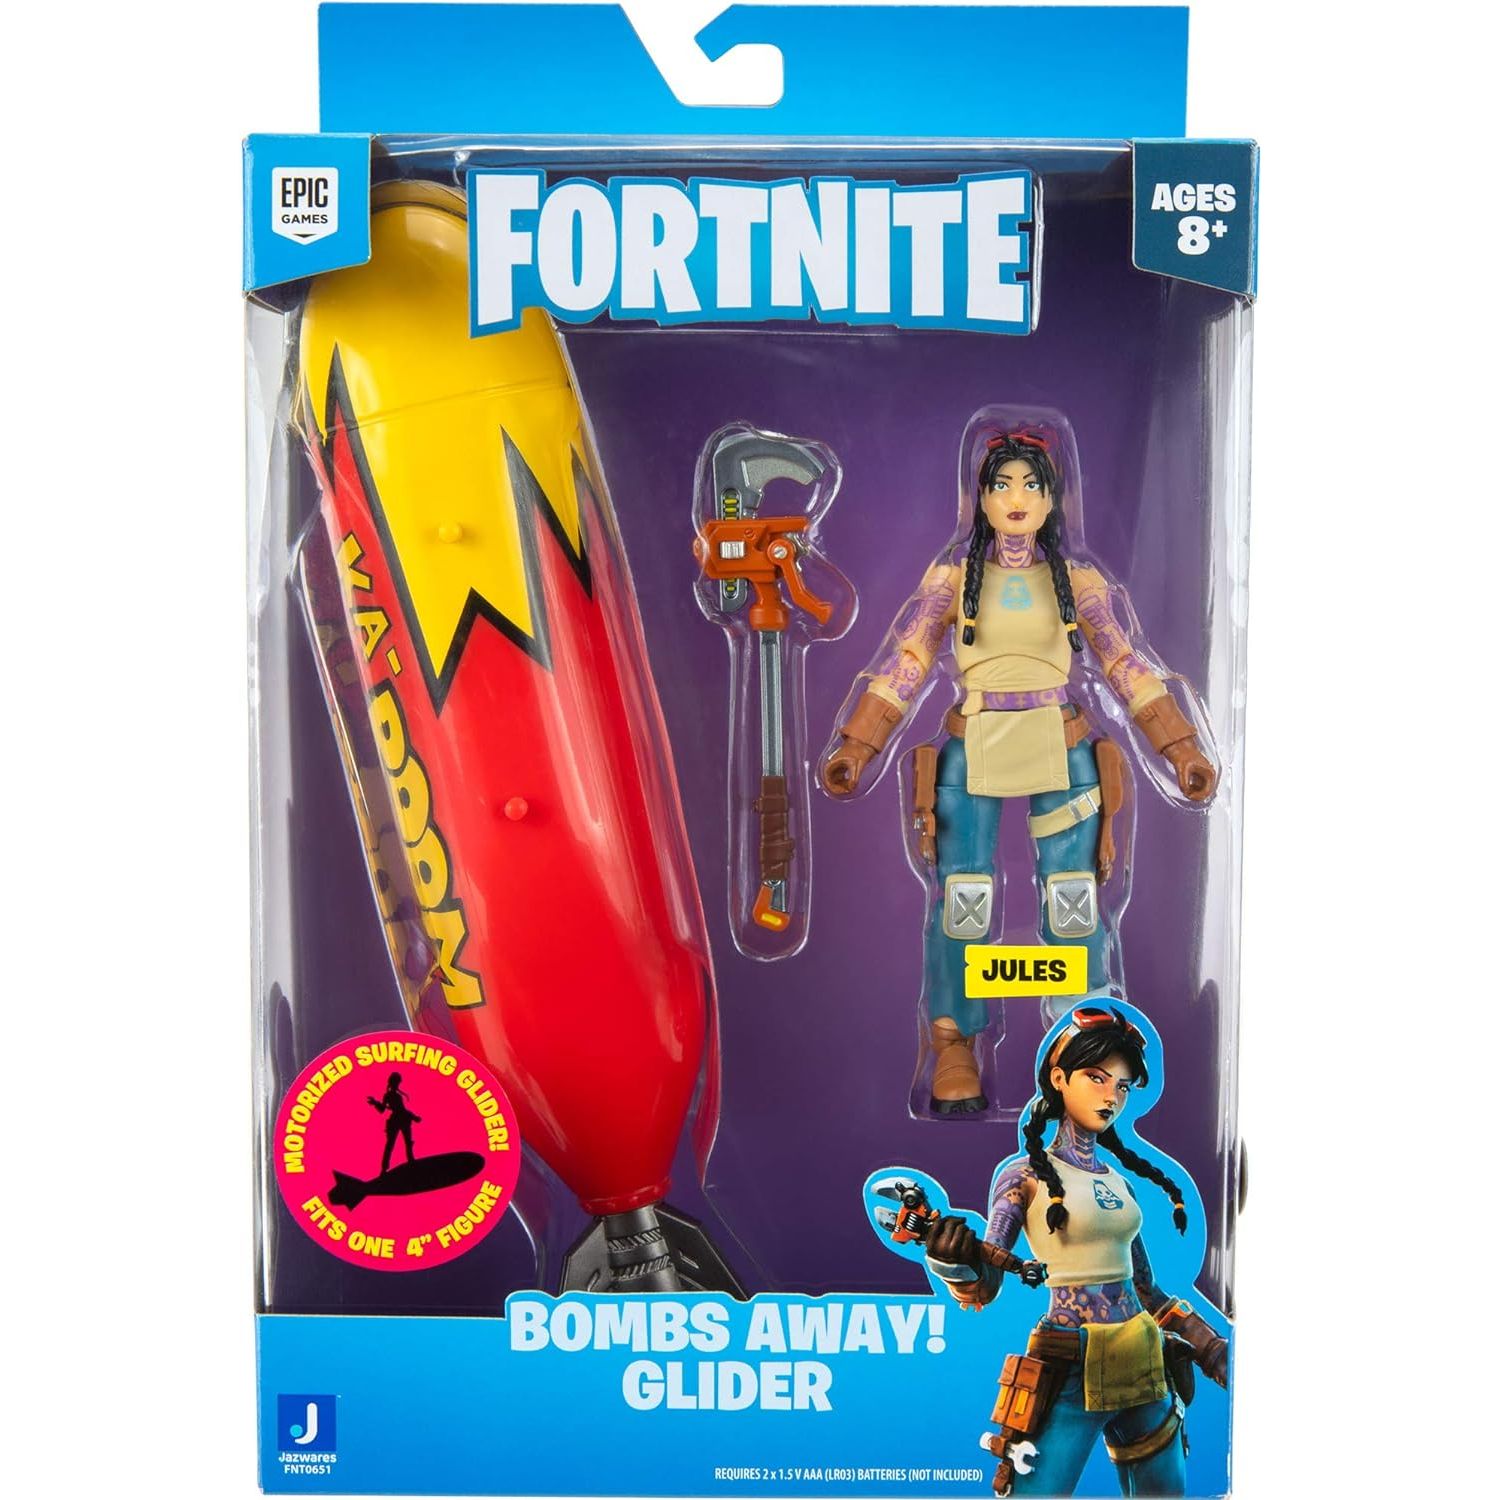 Fortnite - Small Feature Vehicle Bombs Away! Glider